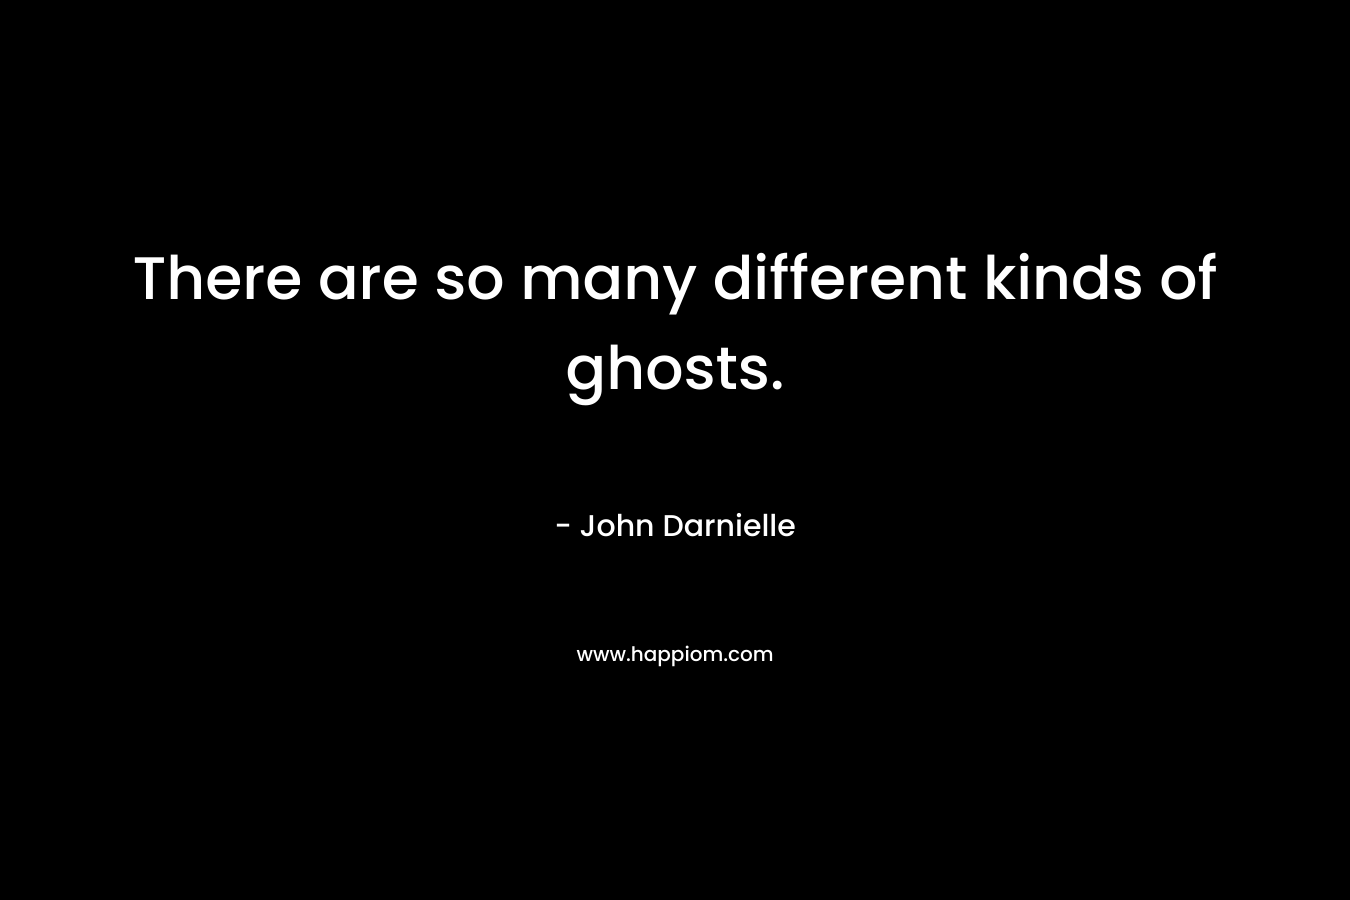 There are so many different kinds of ghosts.